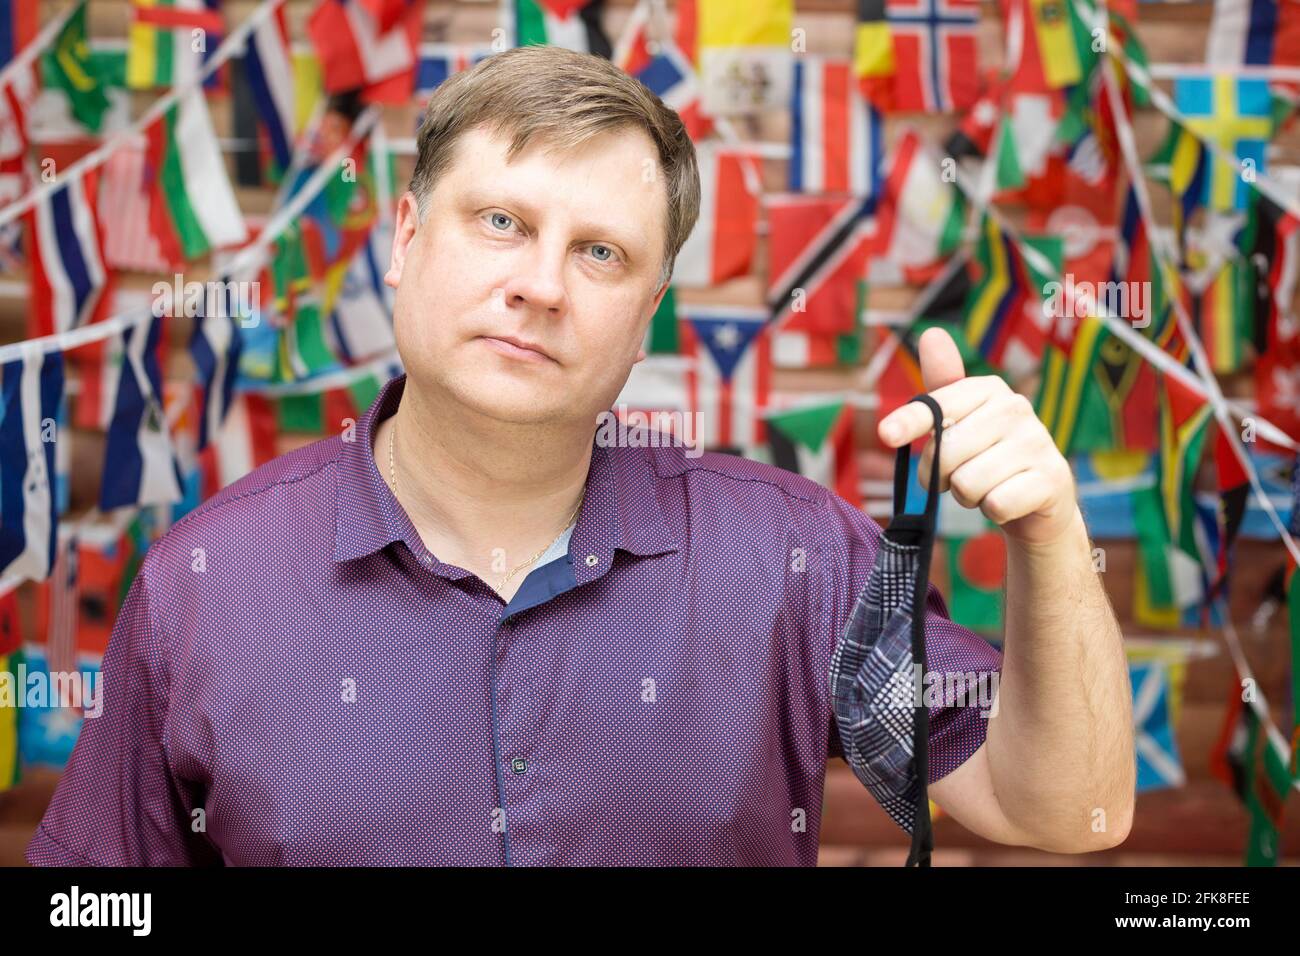 A man shares a used medical mask in his hands against background of country flags. Stock Photo